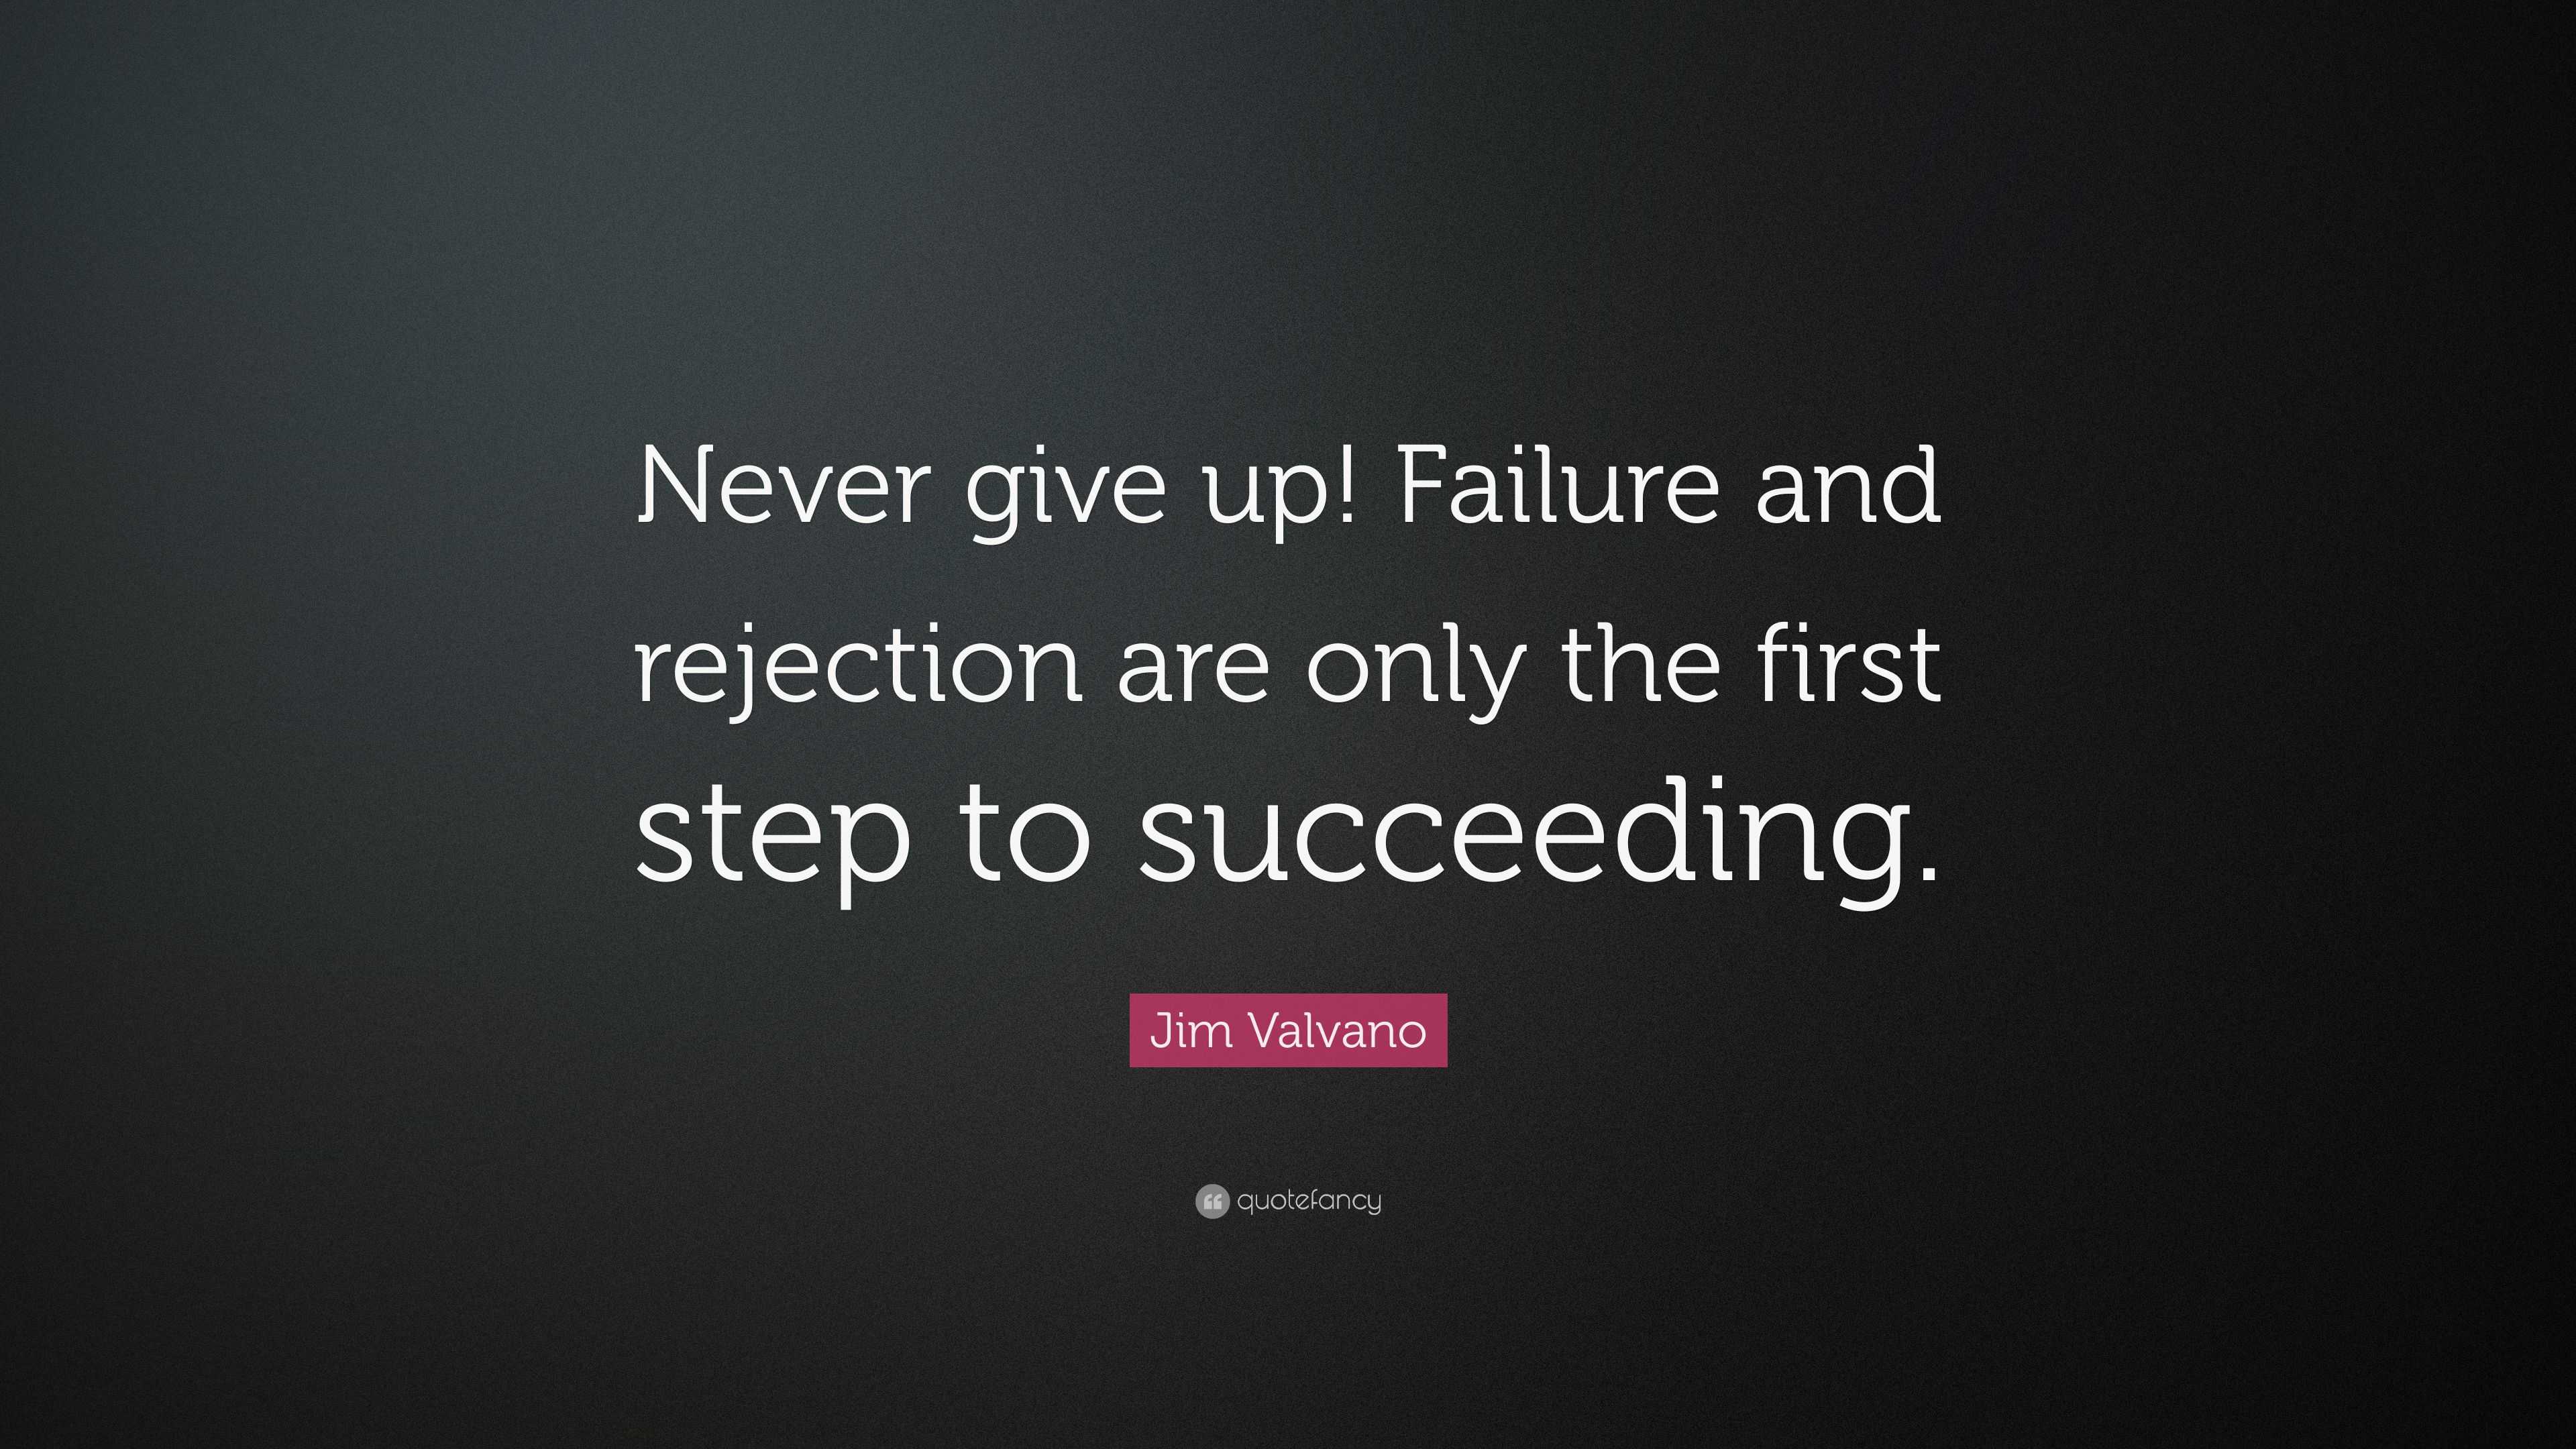 Failure and rejection are only the first step to succeeding. 